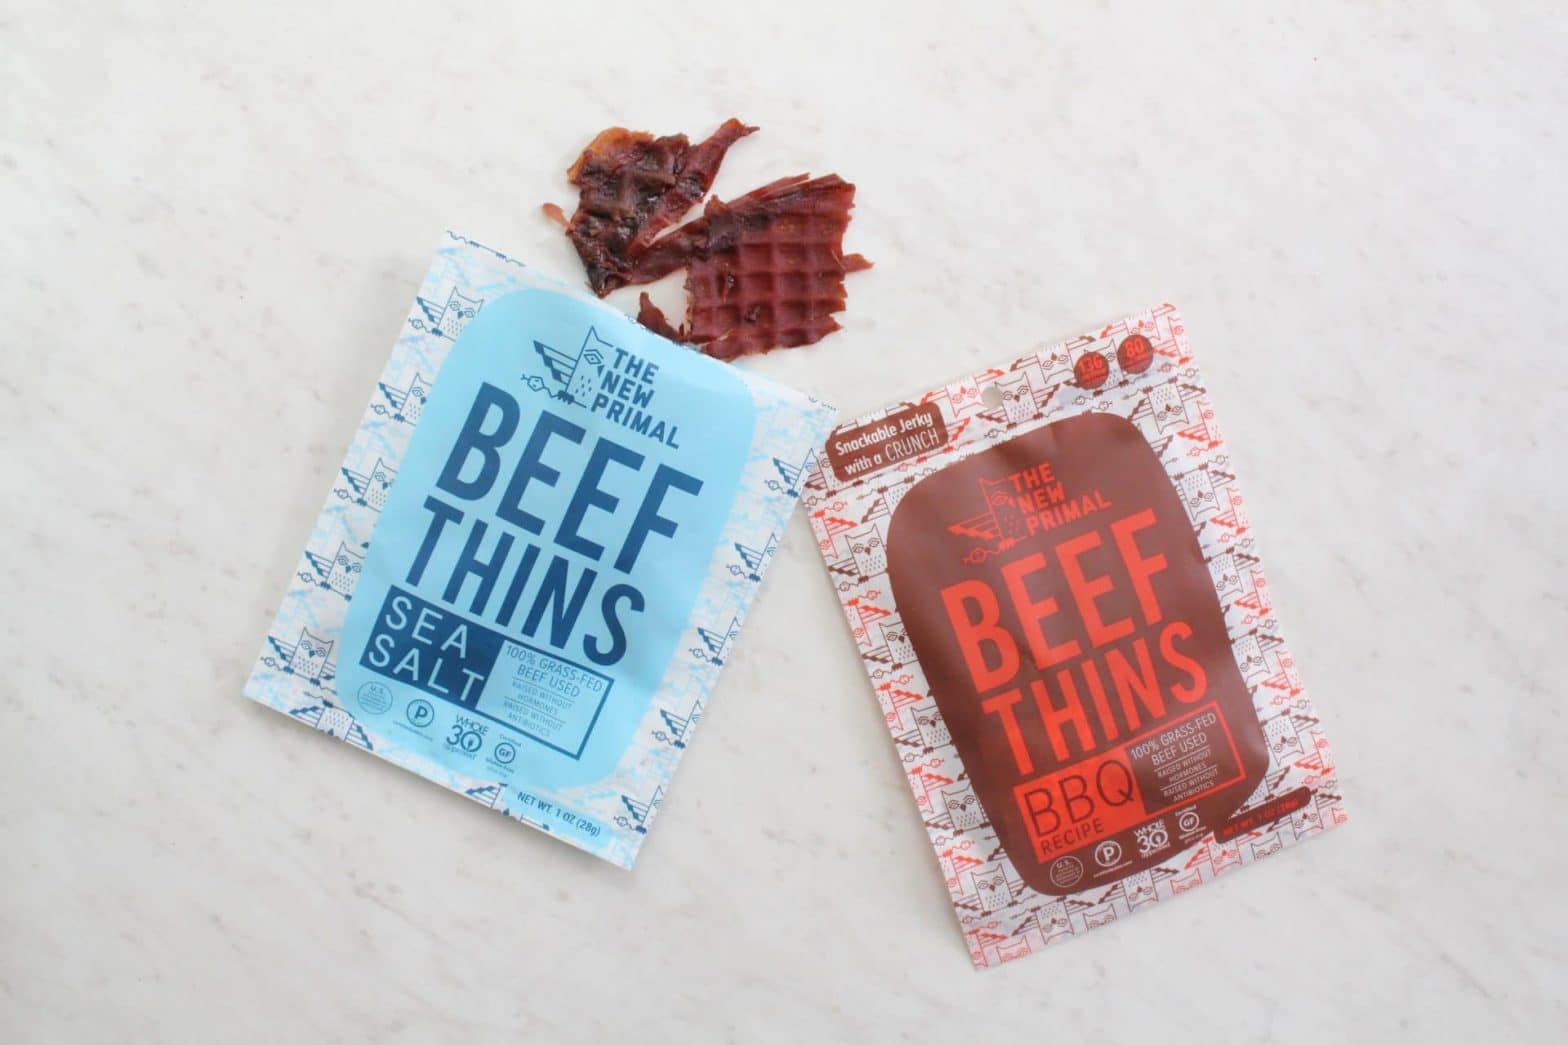 https://www.oliveyouwhole.com/wp-content/uploads/2019/04/Whole30-Approved-Jerky-Brands-7.jpg